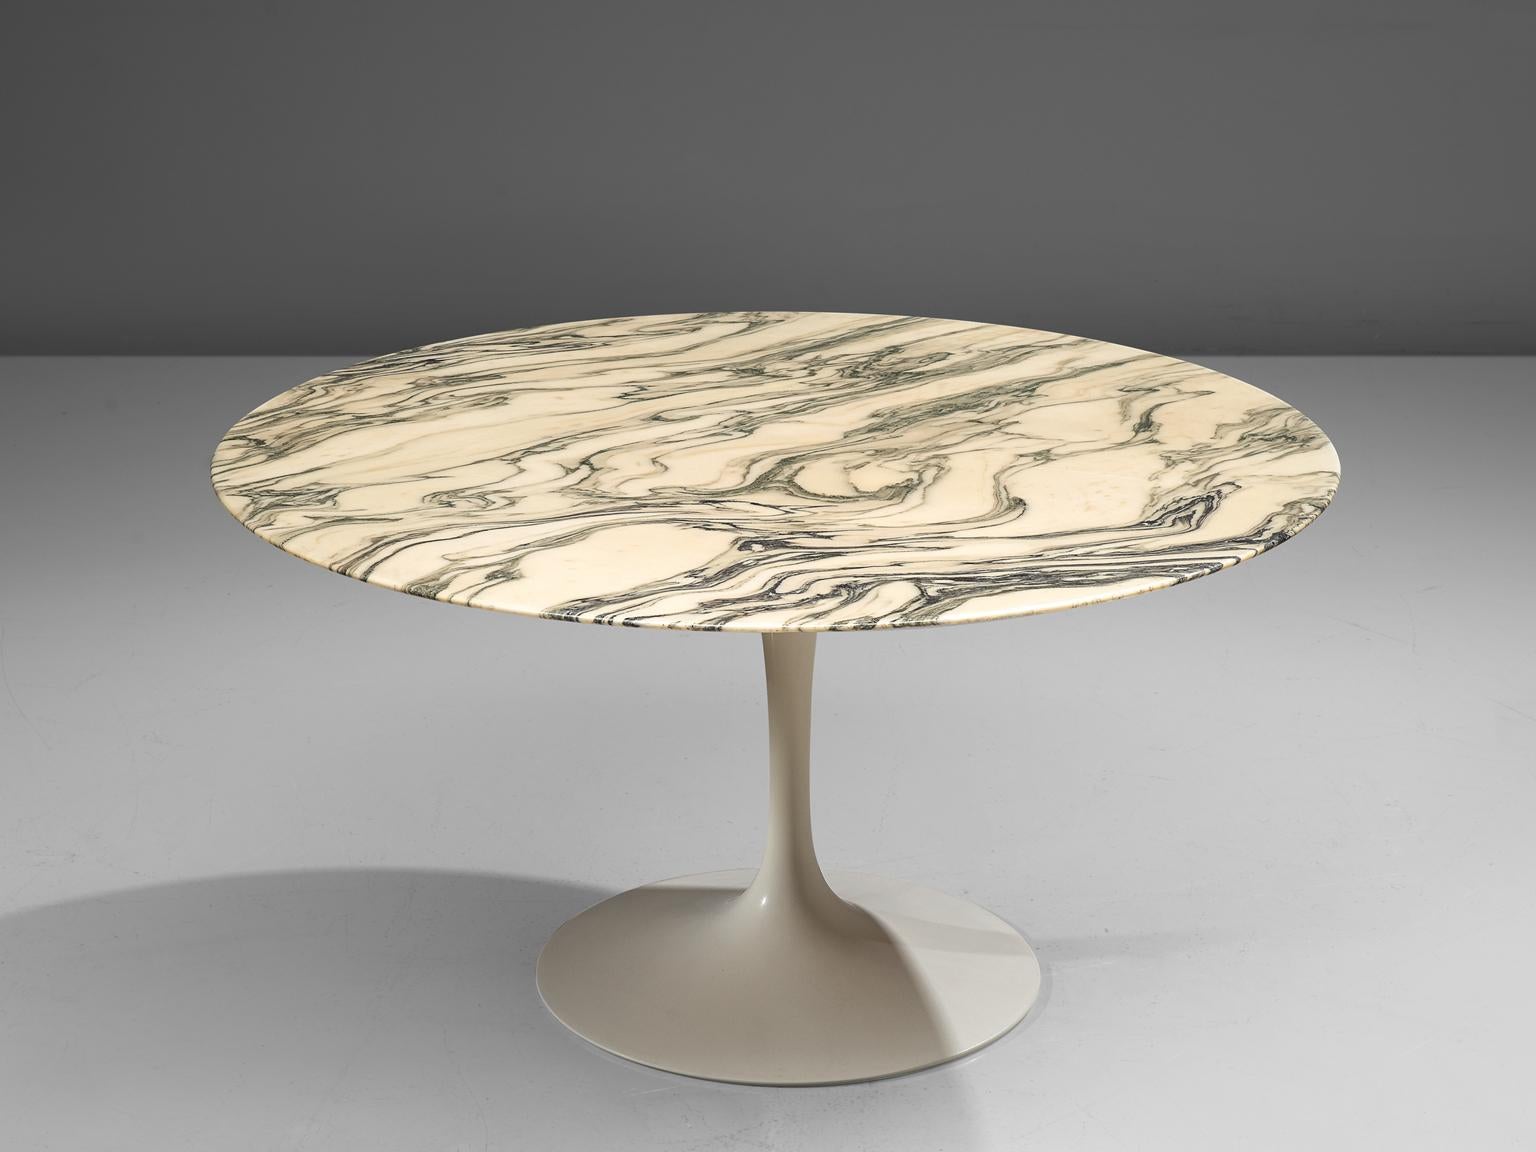 Eero Saarinen for Knoll International, dining table, metal and marble, United States, 1958.

This dining table from the Tulip collection and is designed by Eero Saarinen for Knoll International. This iconic tulip pedestal table is designed by Eero